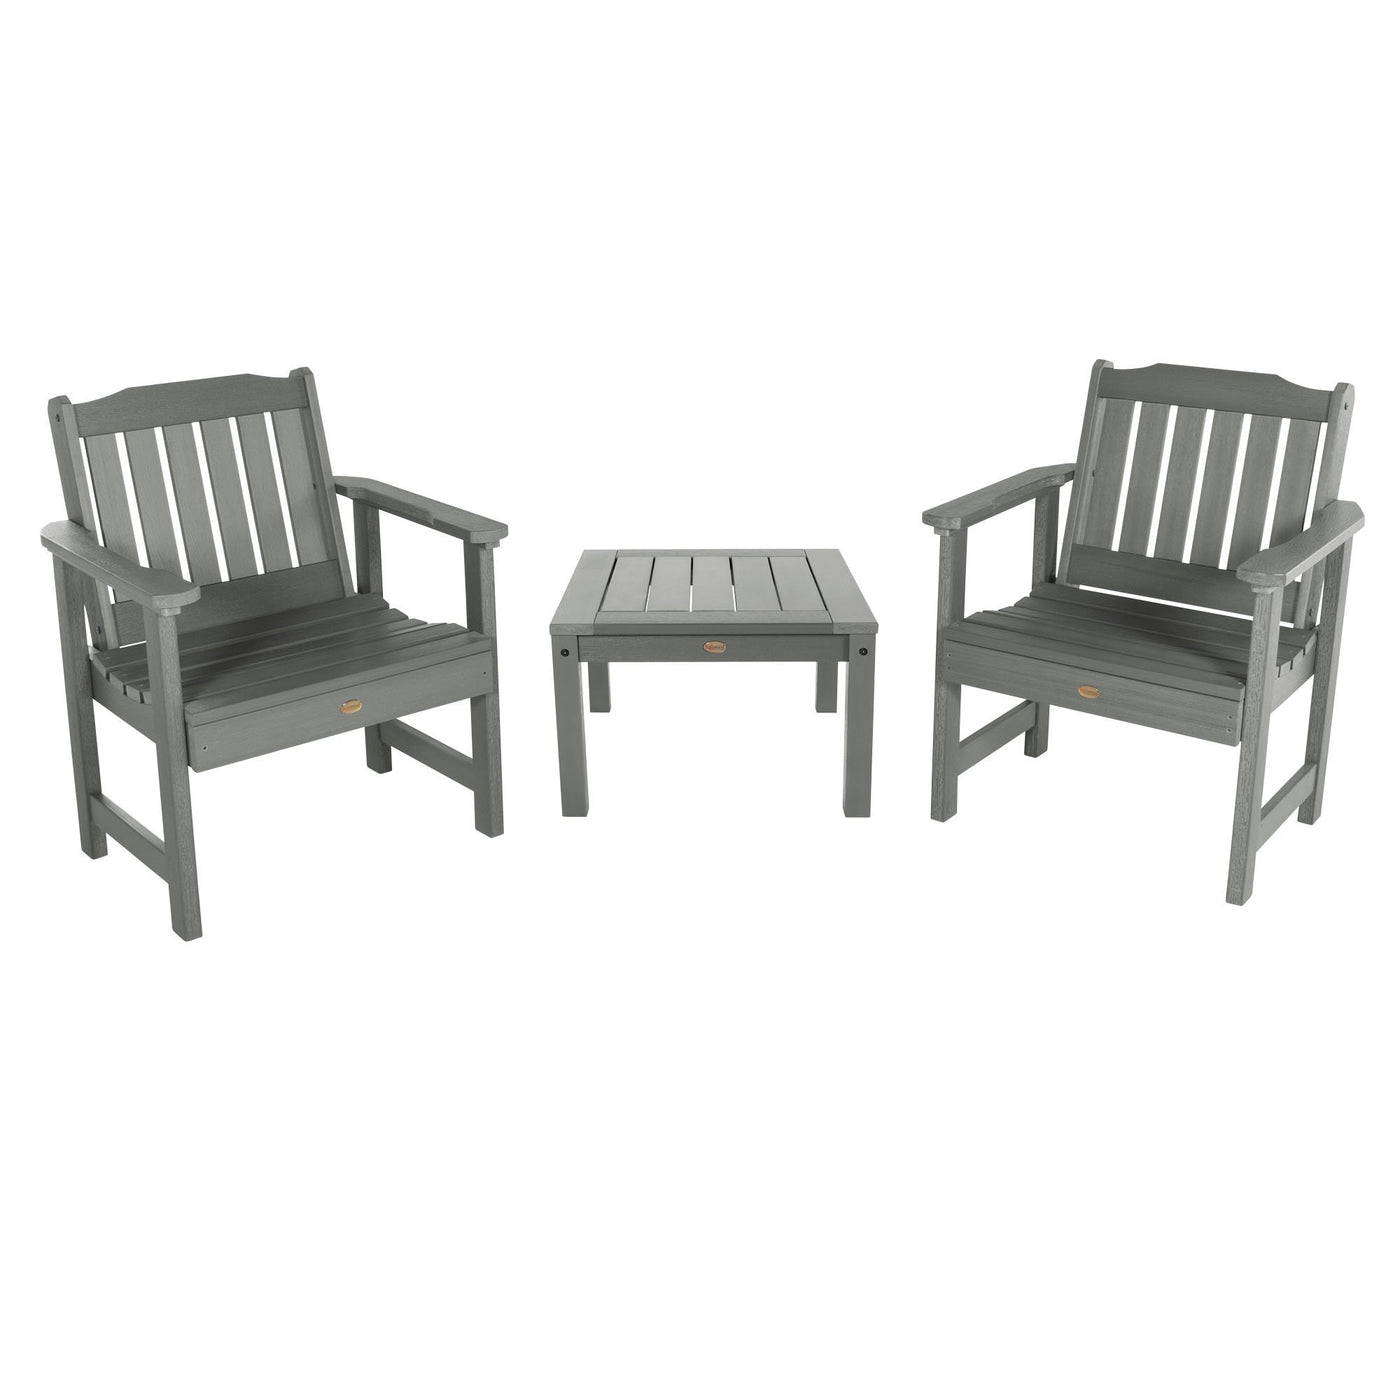 2 Lehigh Garden Chairs with 1 Square Side Table Highwood USA Coastal Teak 